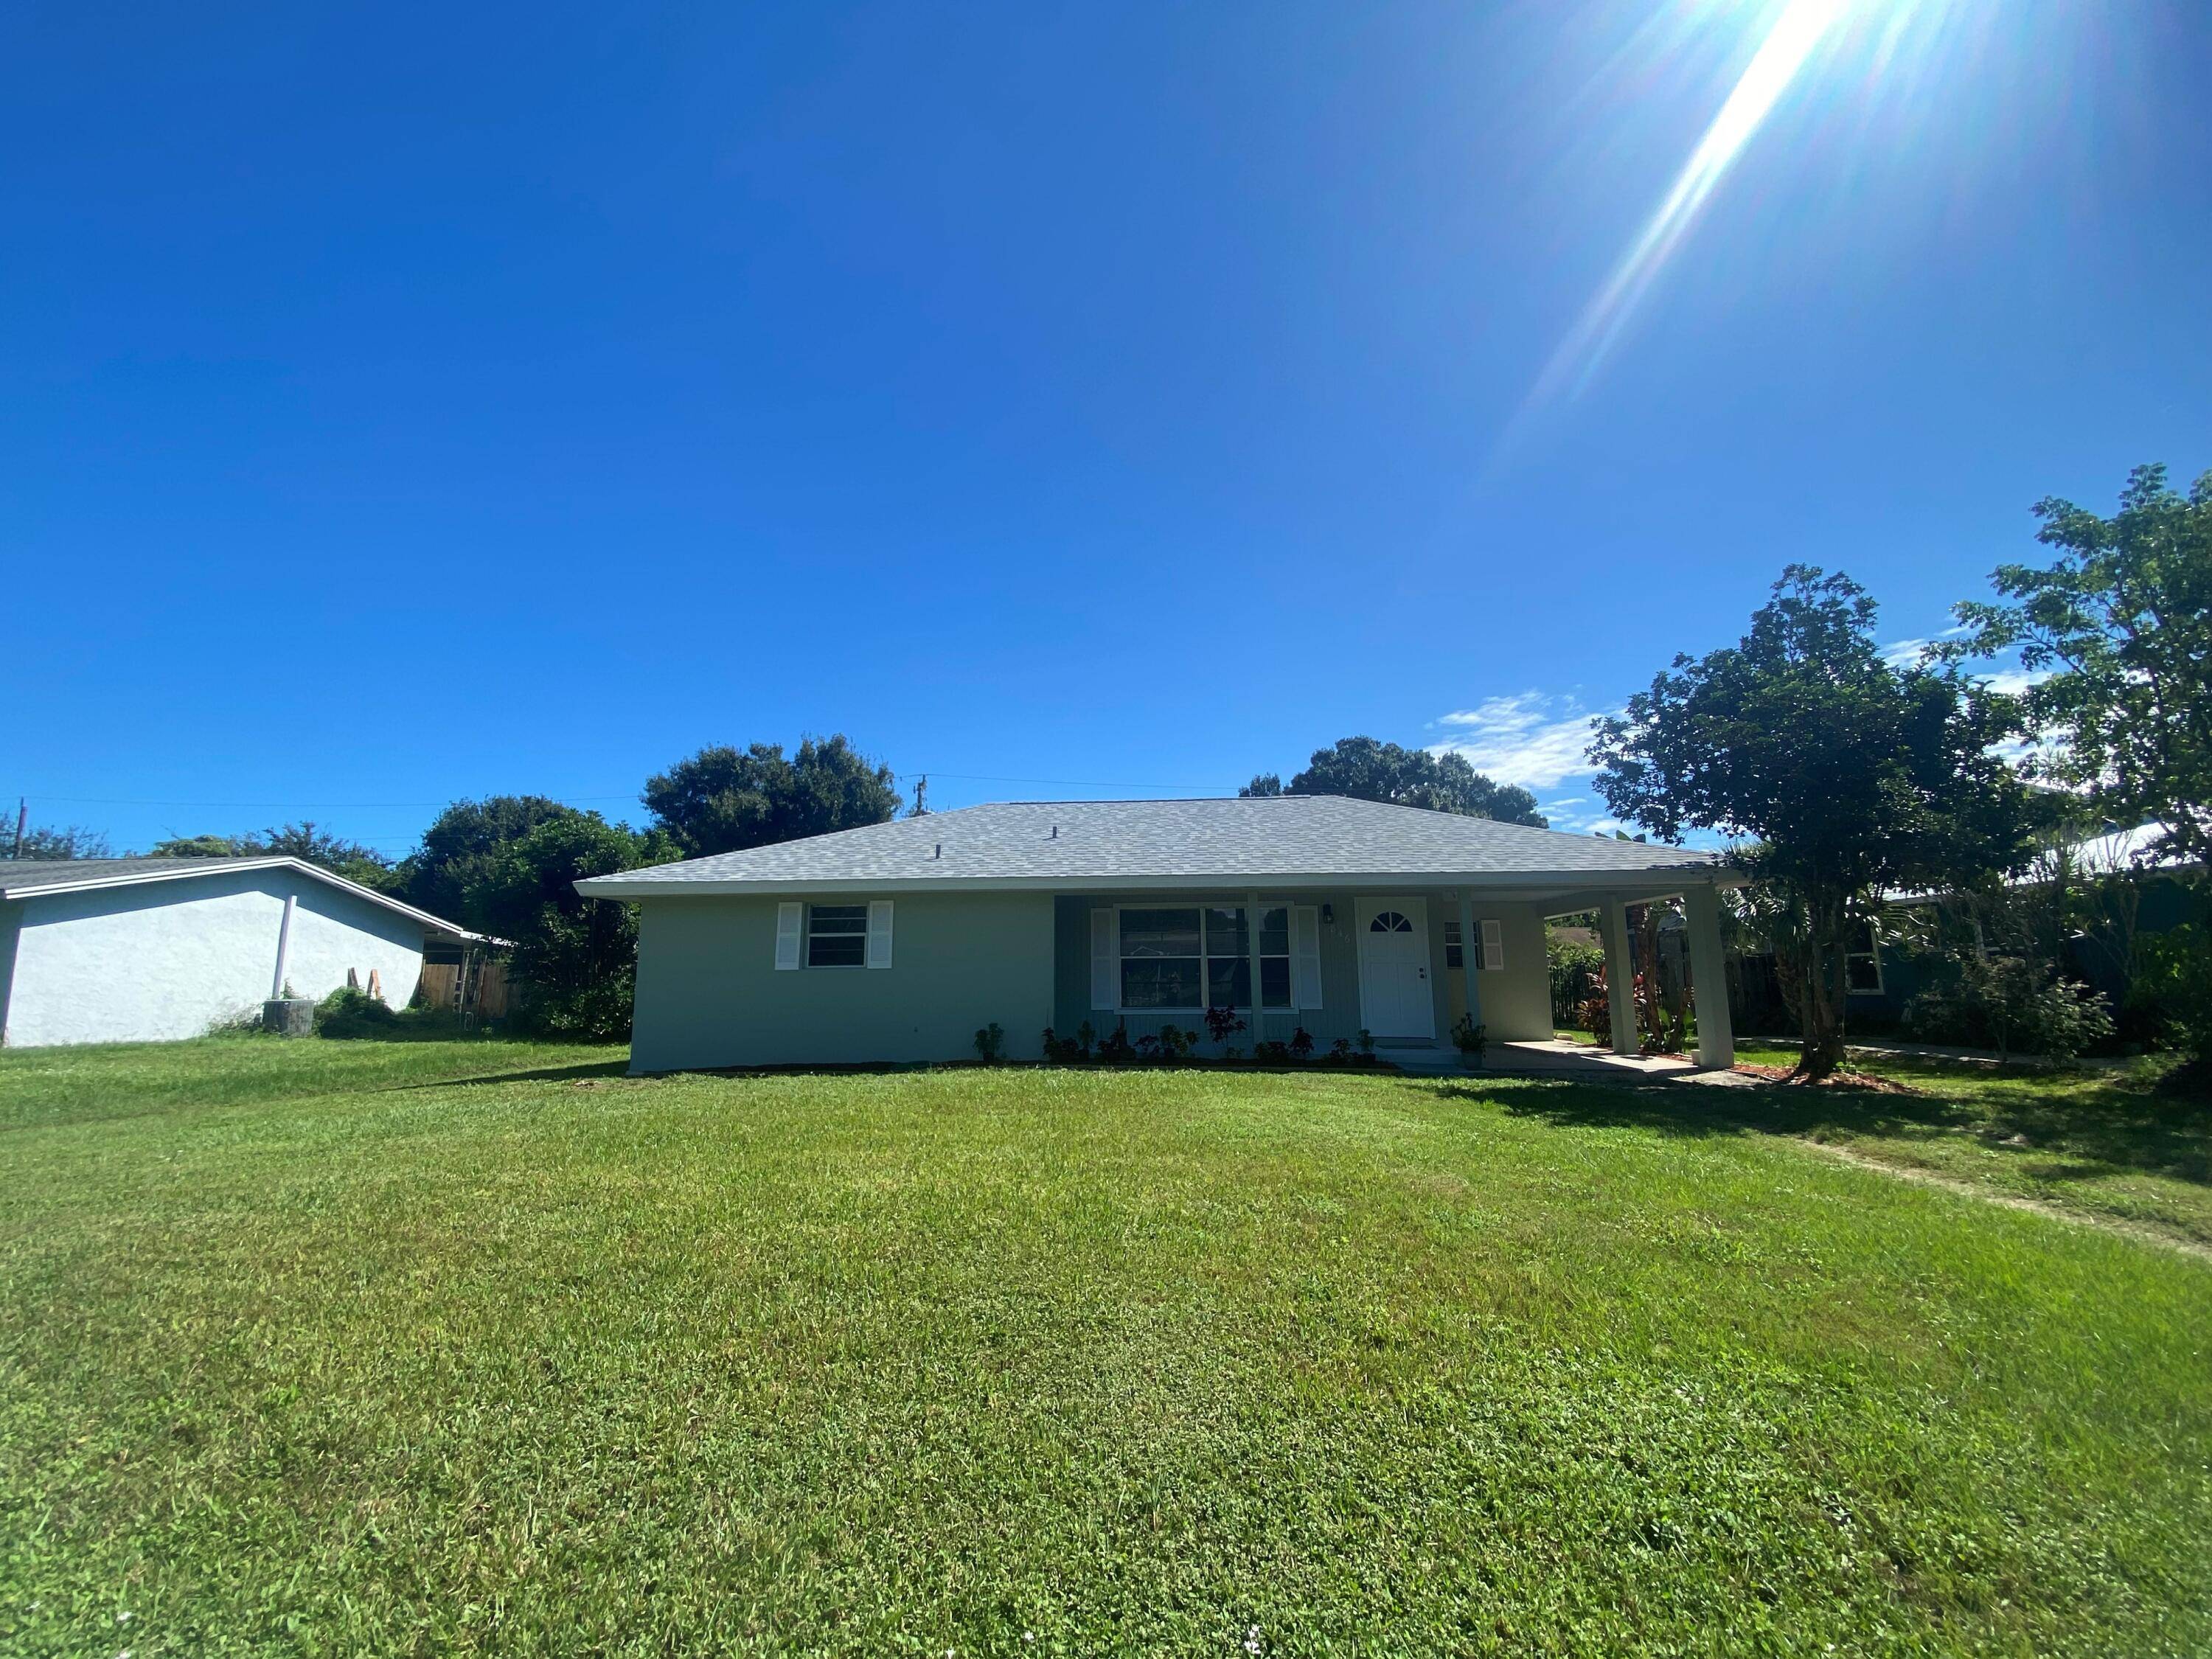 This two bedroom, two bathroom single family home is conveniently located in the heart of Vero Beach, on a quiet road with no thru traffic.